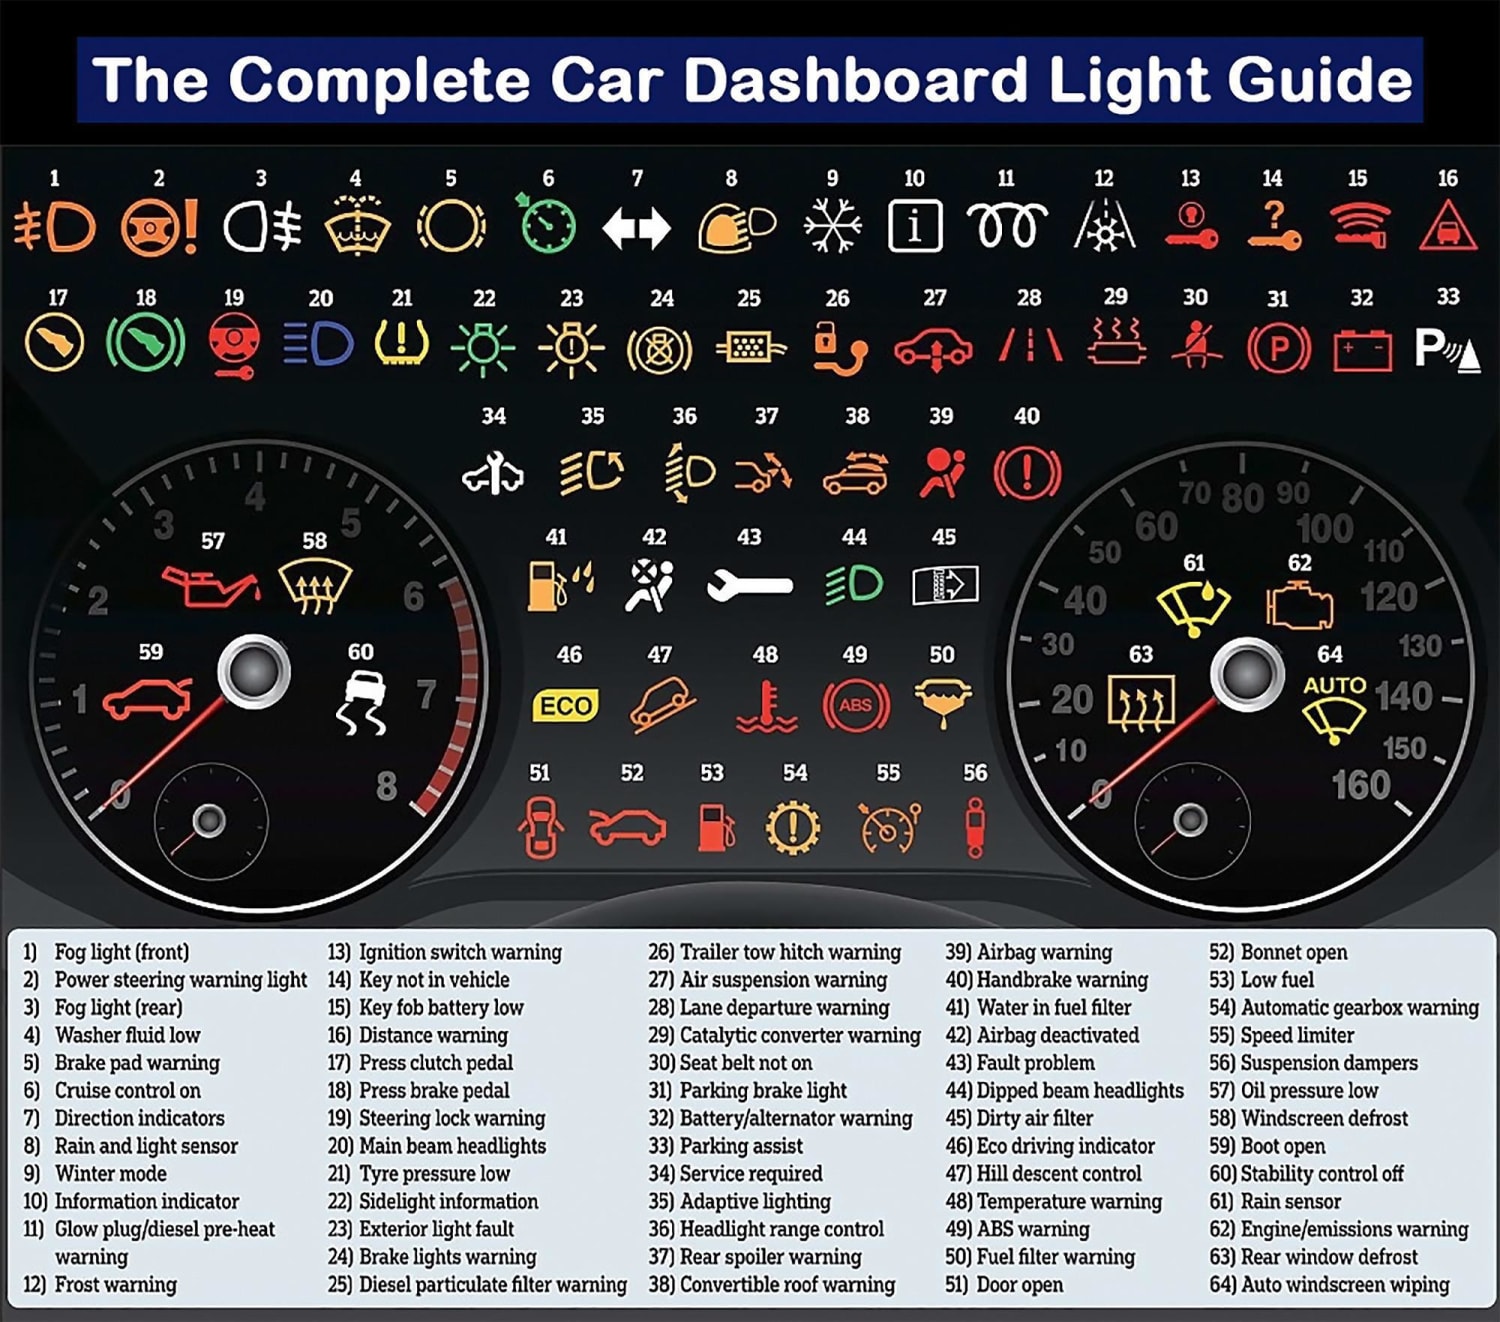 Complete car dashboard light guide 😎